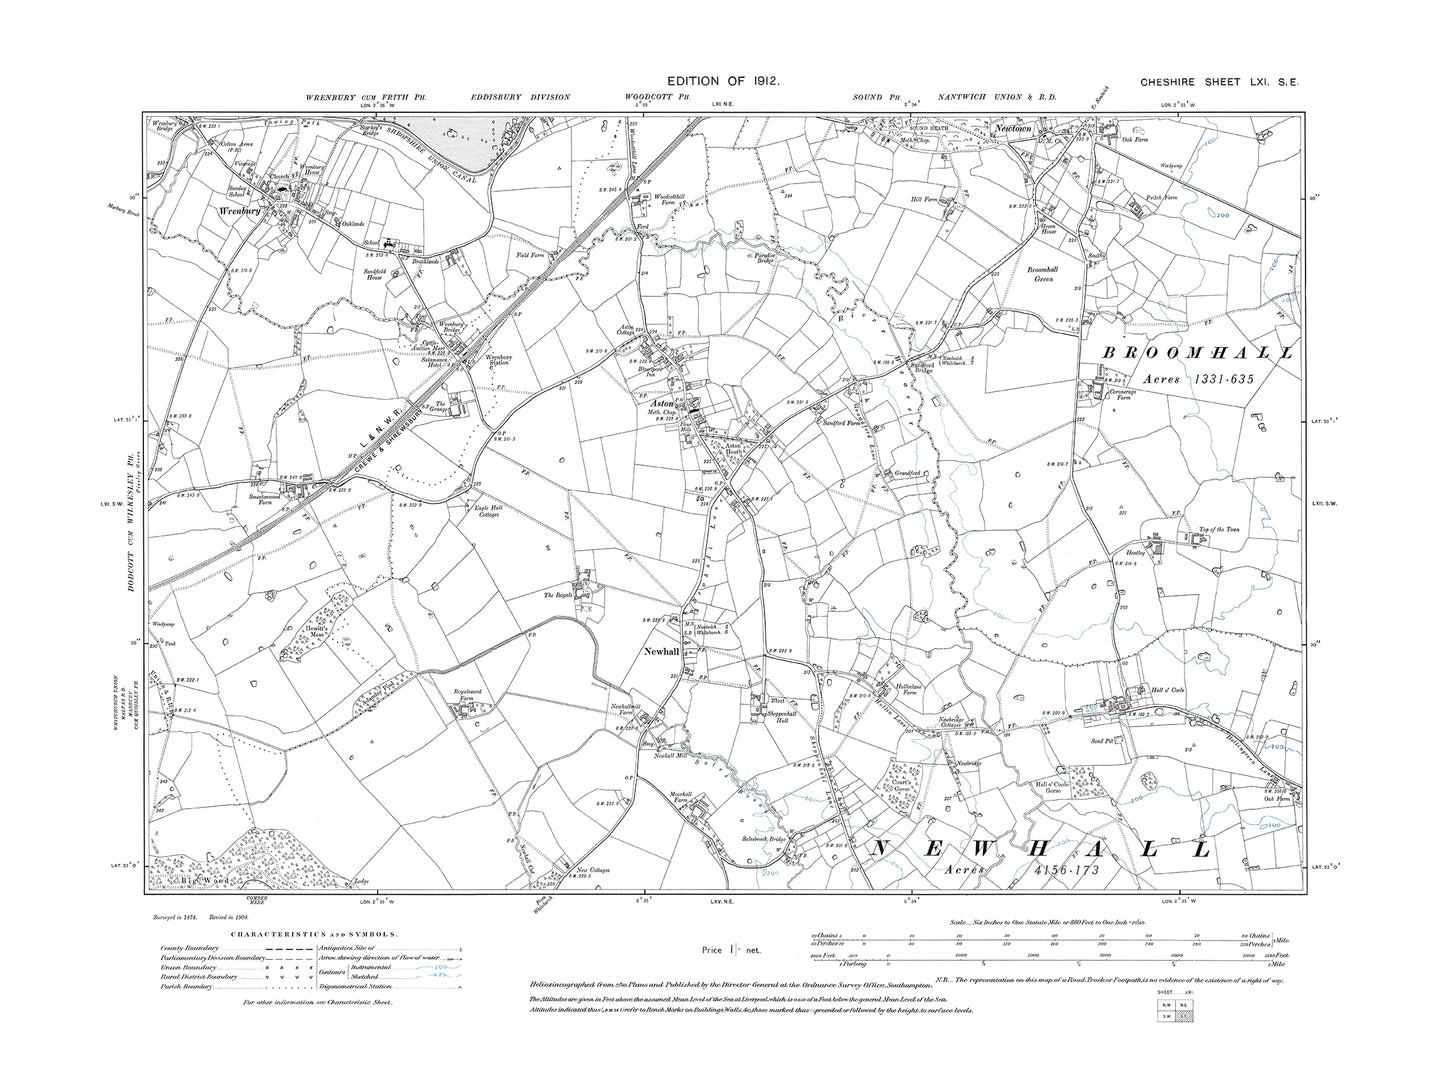 Old OS map dated 1912, showing Wrenbury, Aston, Newhall in Cheshire 61SE